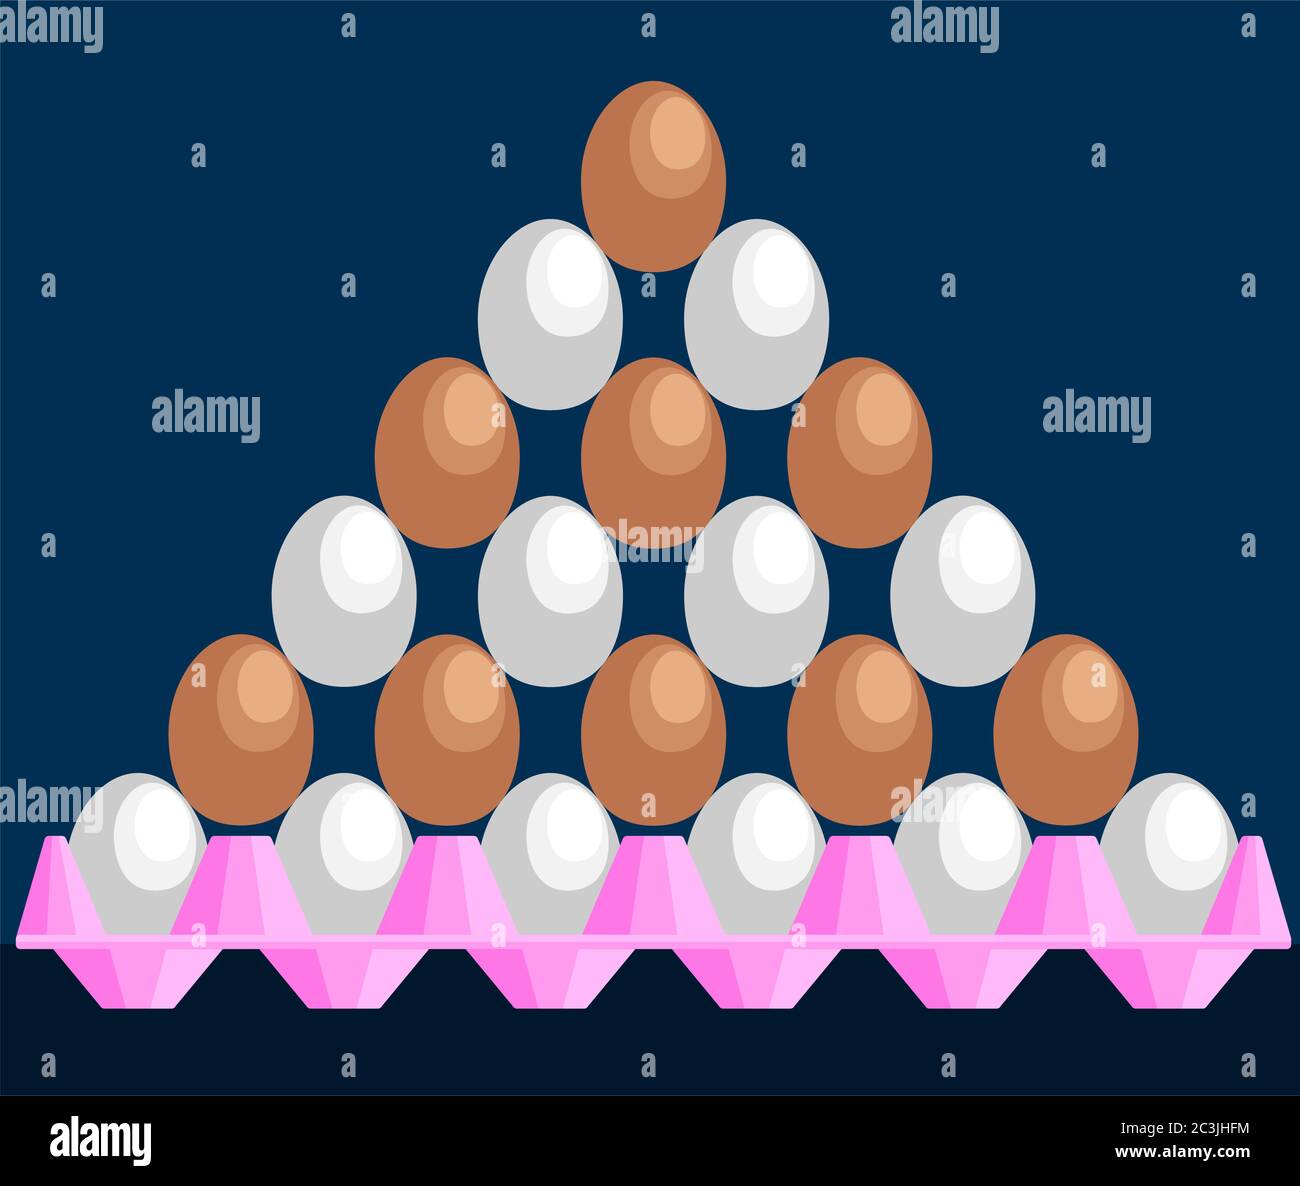 Eggs Stacked in Pyramidal Shape on Tray Icon Vector Illustration Stock Vector